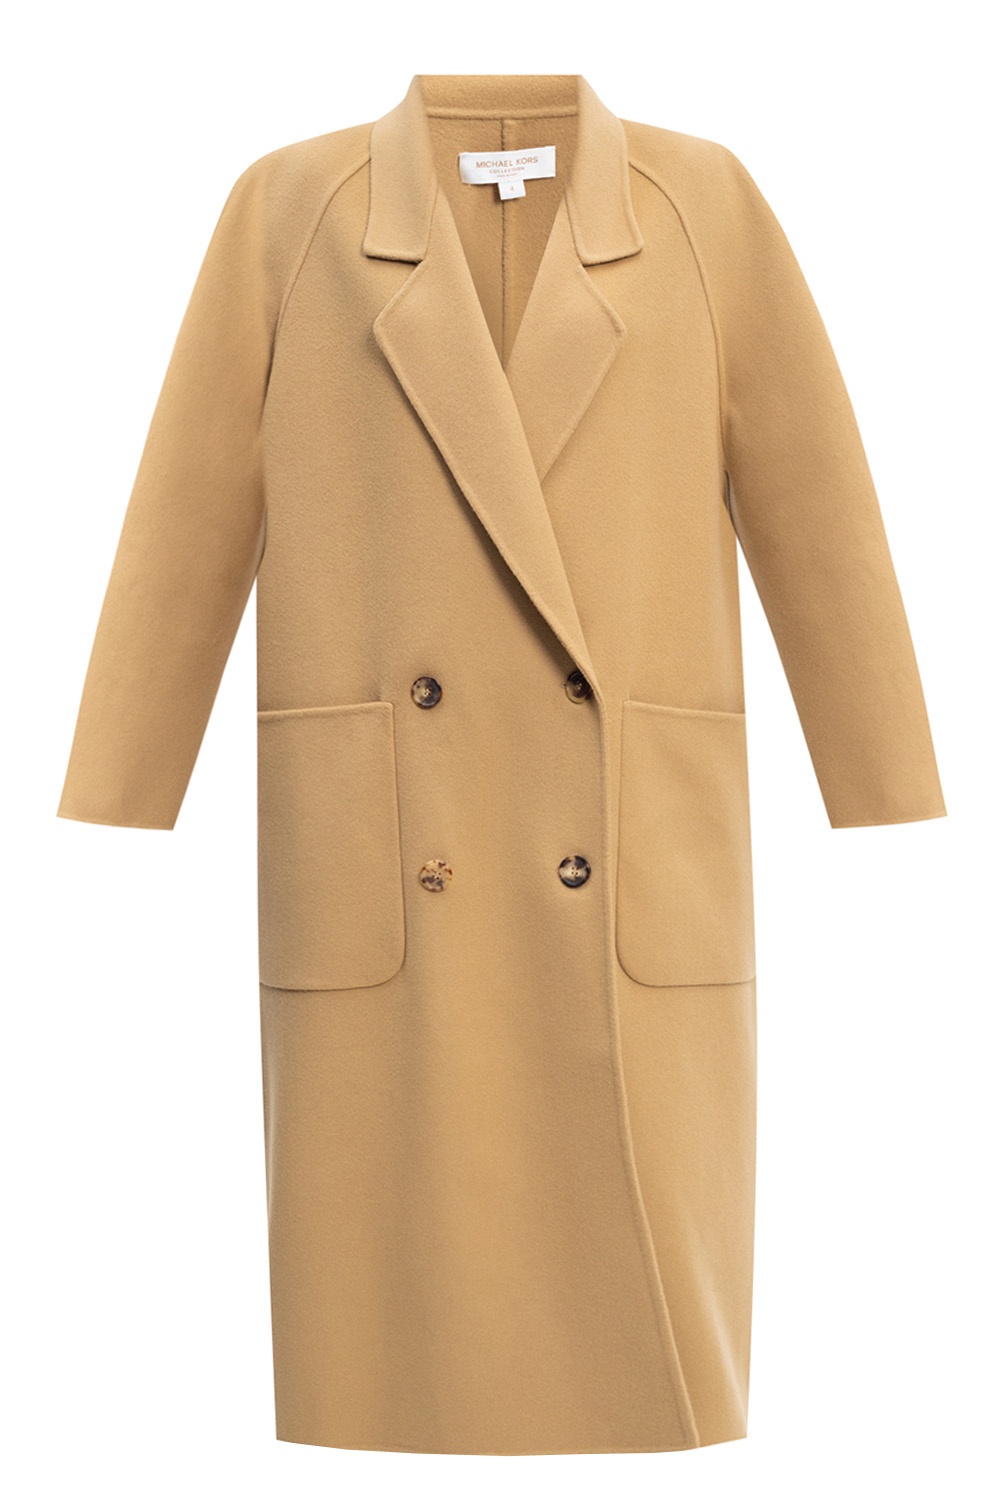 michael kors double breasted wool coat